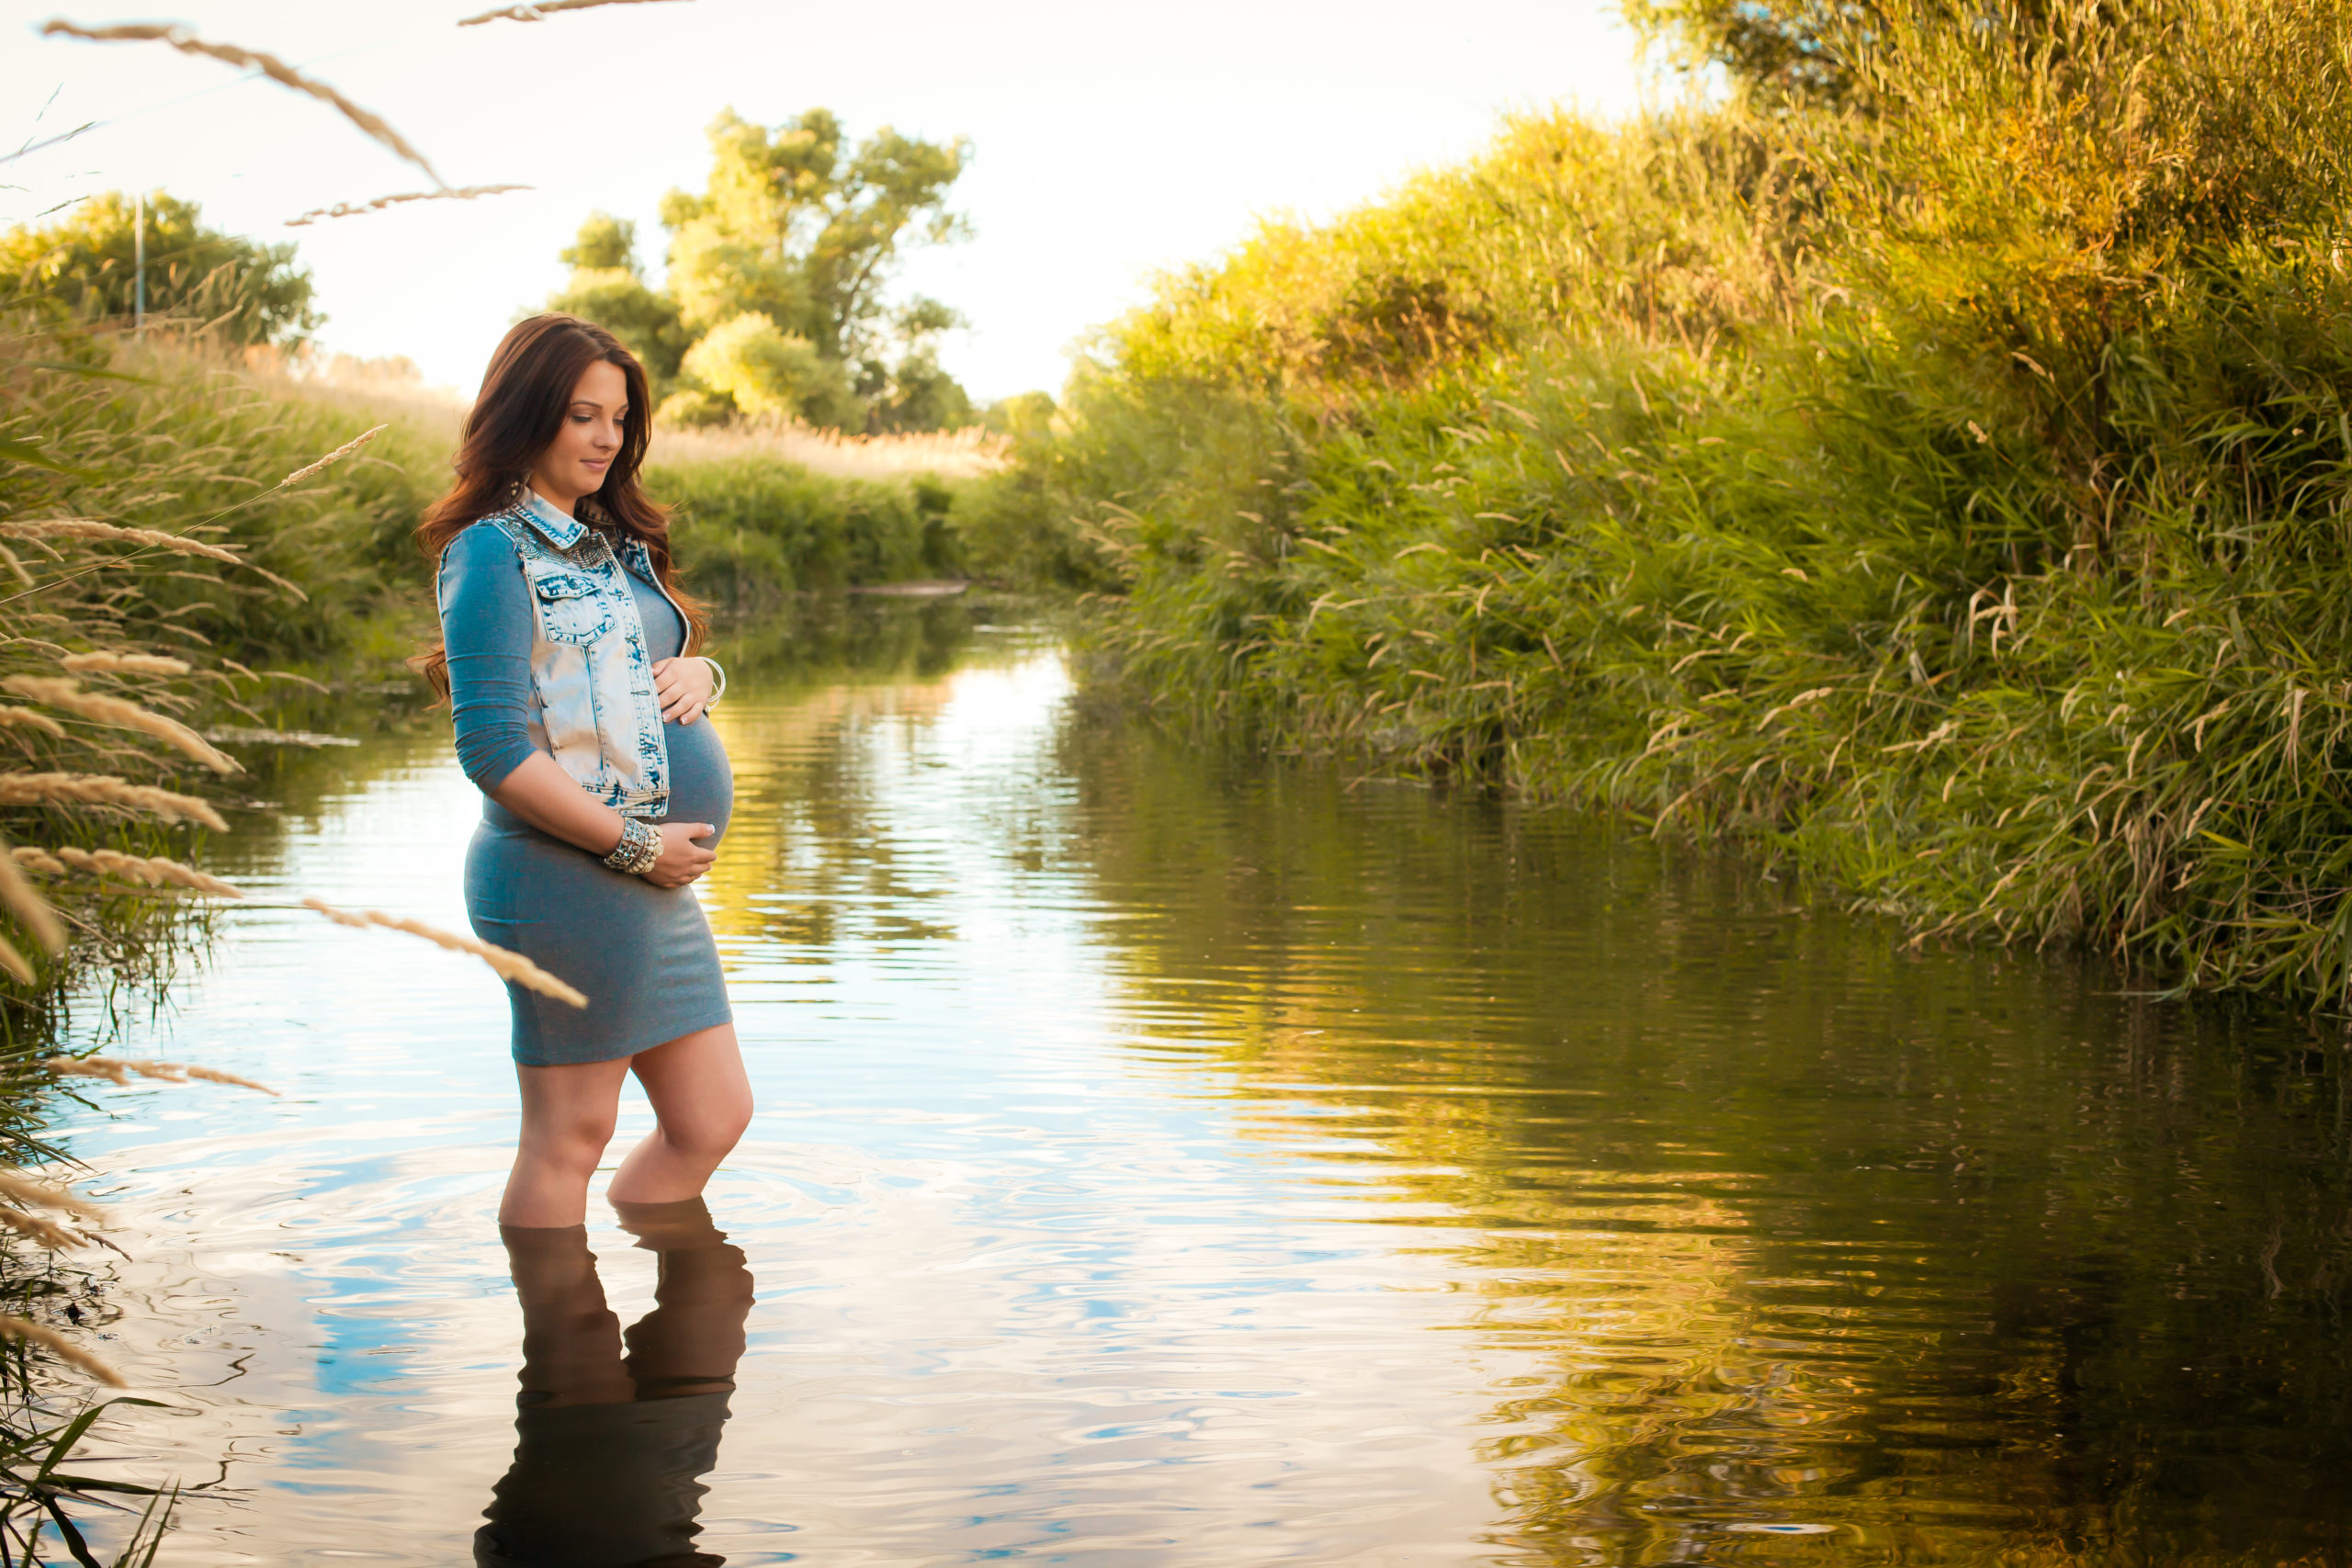 Pregnant mom, posing sideways while holding bump, standing in a river during golden hour.